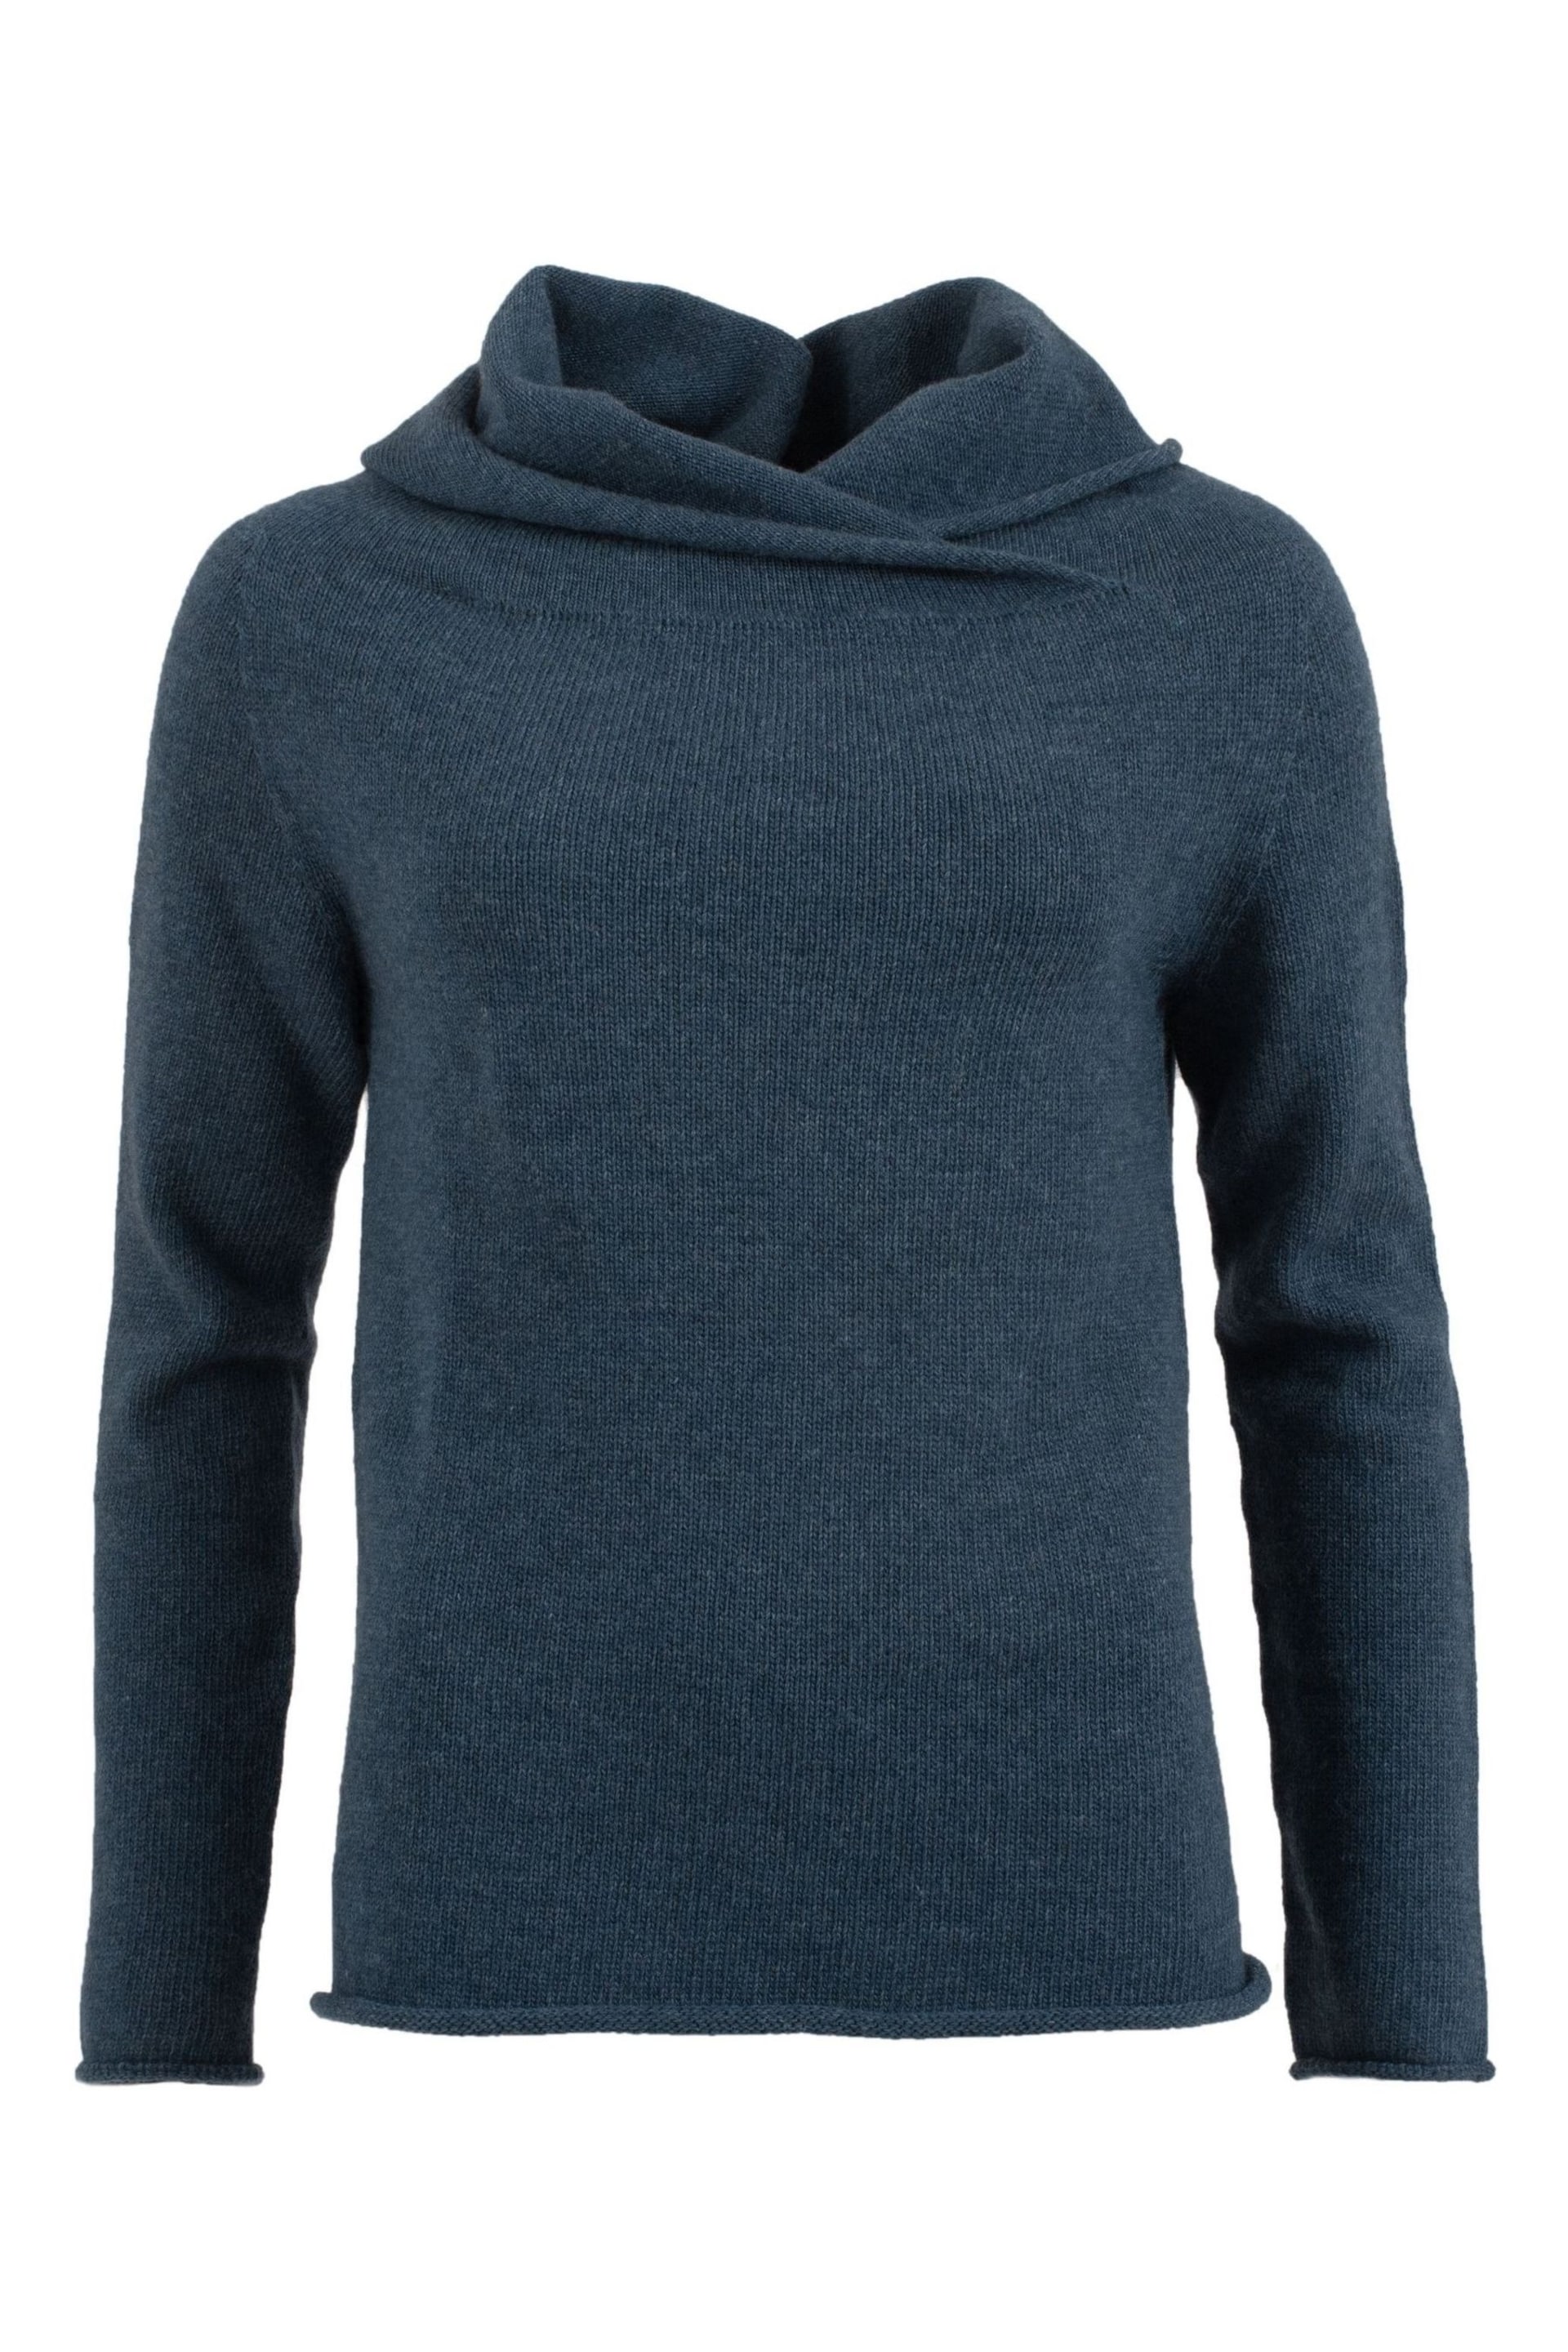 Celtic & Co Blue Collared Slouch Jumper - Image 1 of 3